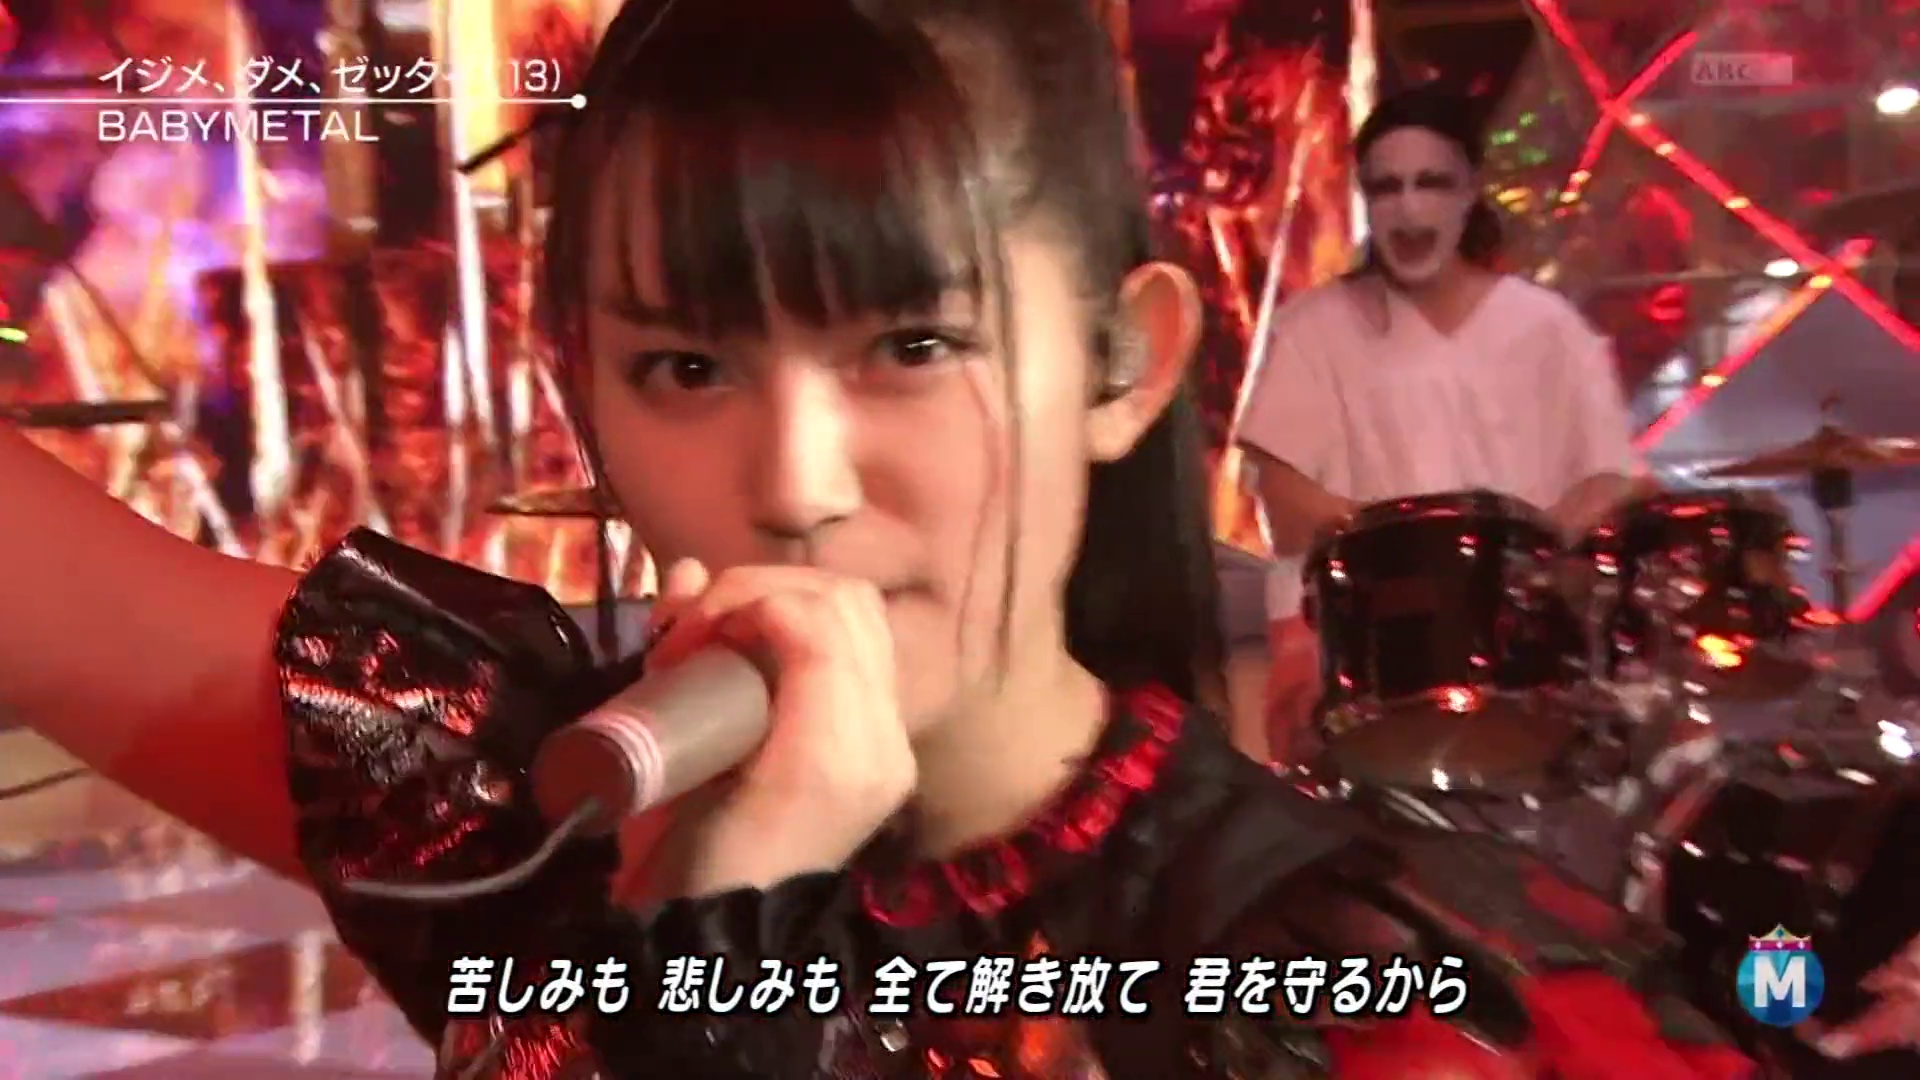 Babymetal Catch Me If You Can かくれんぼ Live Combination 歌詞付き Youtube Babymetal動画